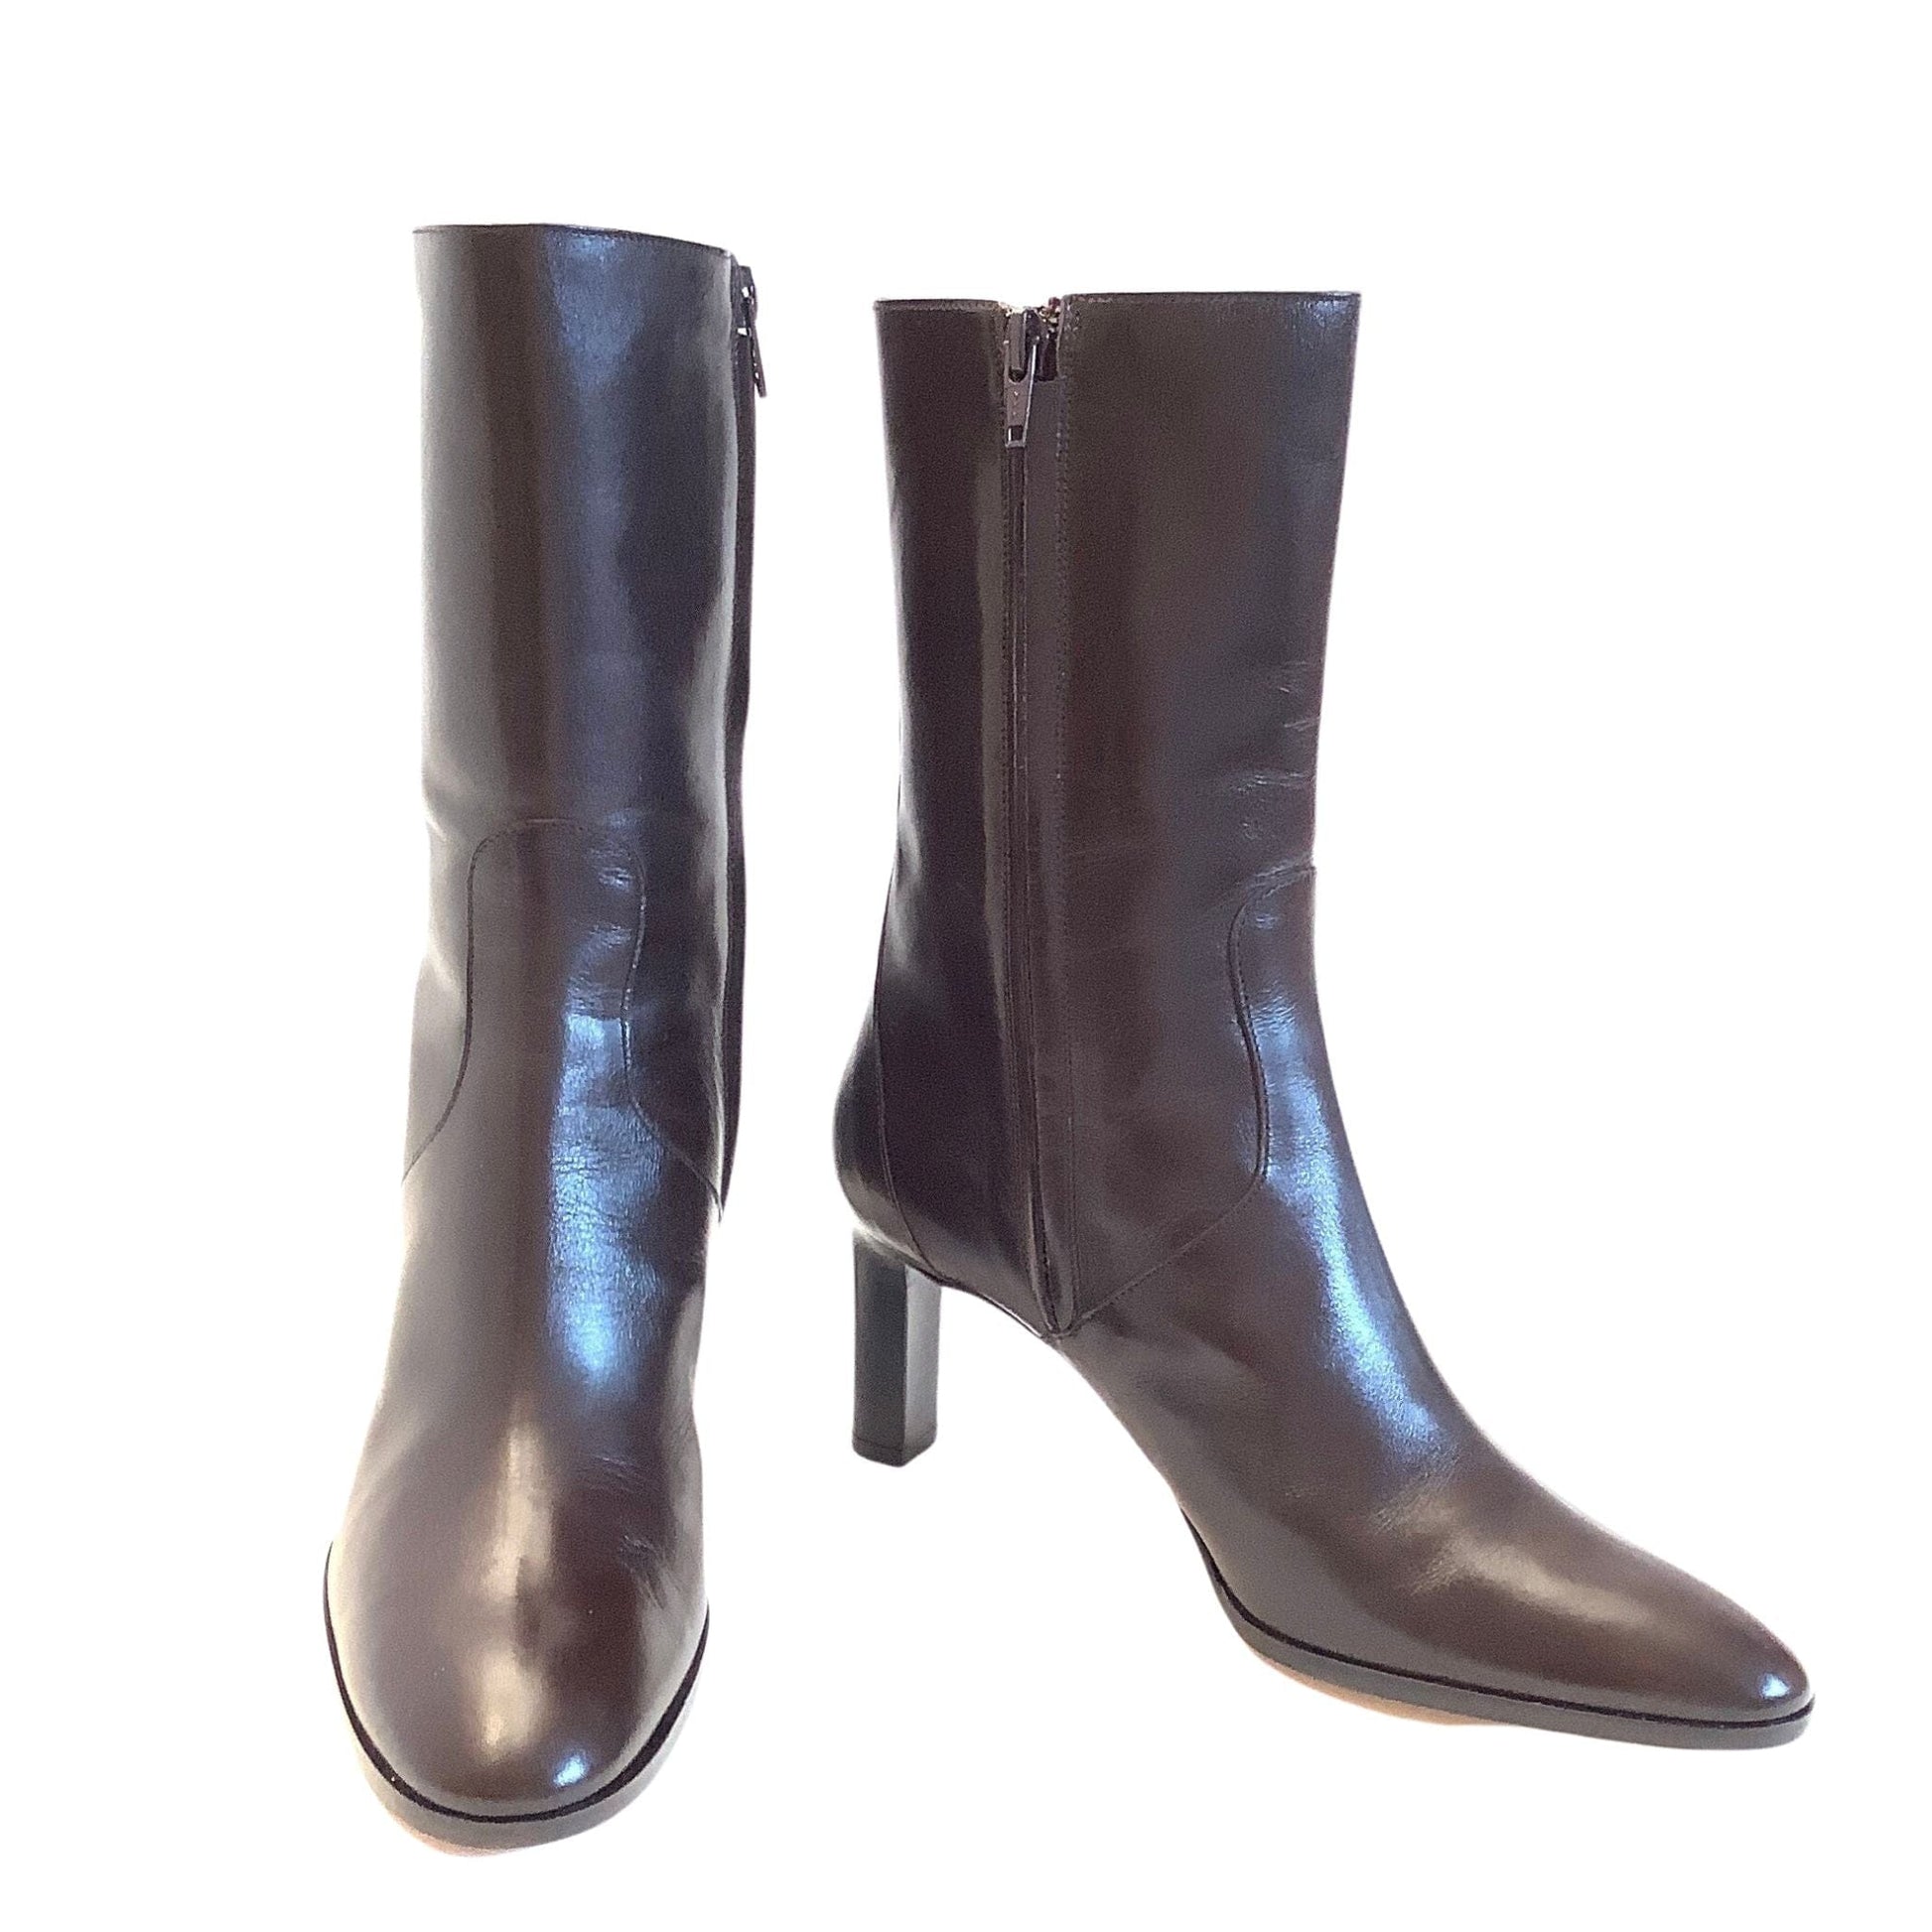 Pollini Mid Calf Boots 8 / Brown / Y2K - Now